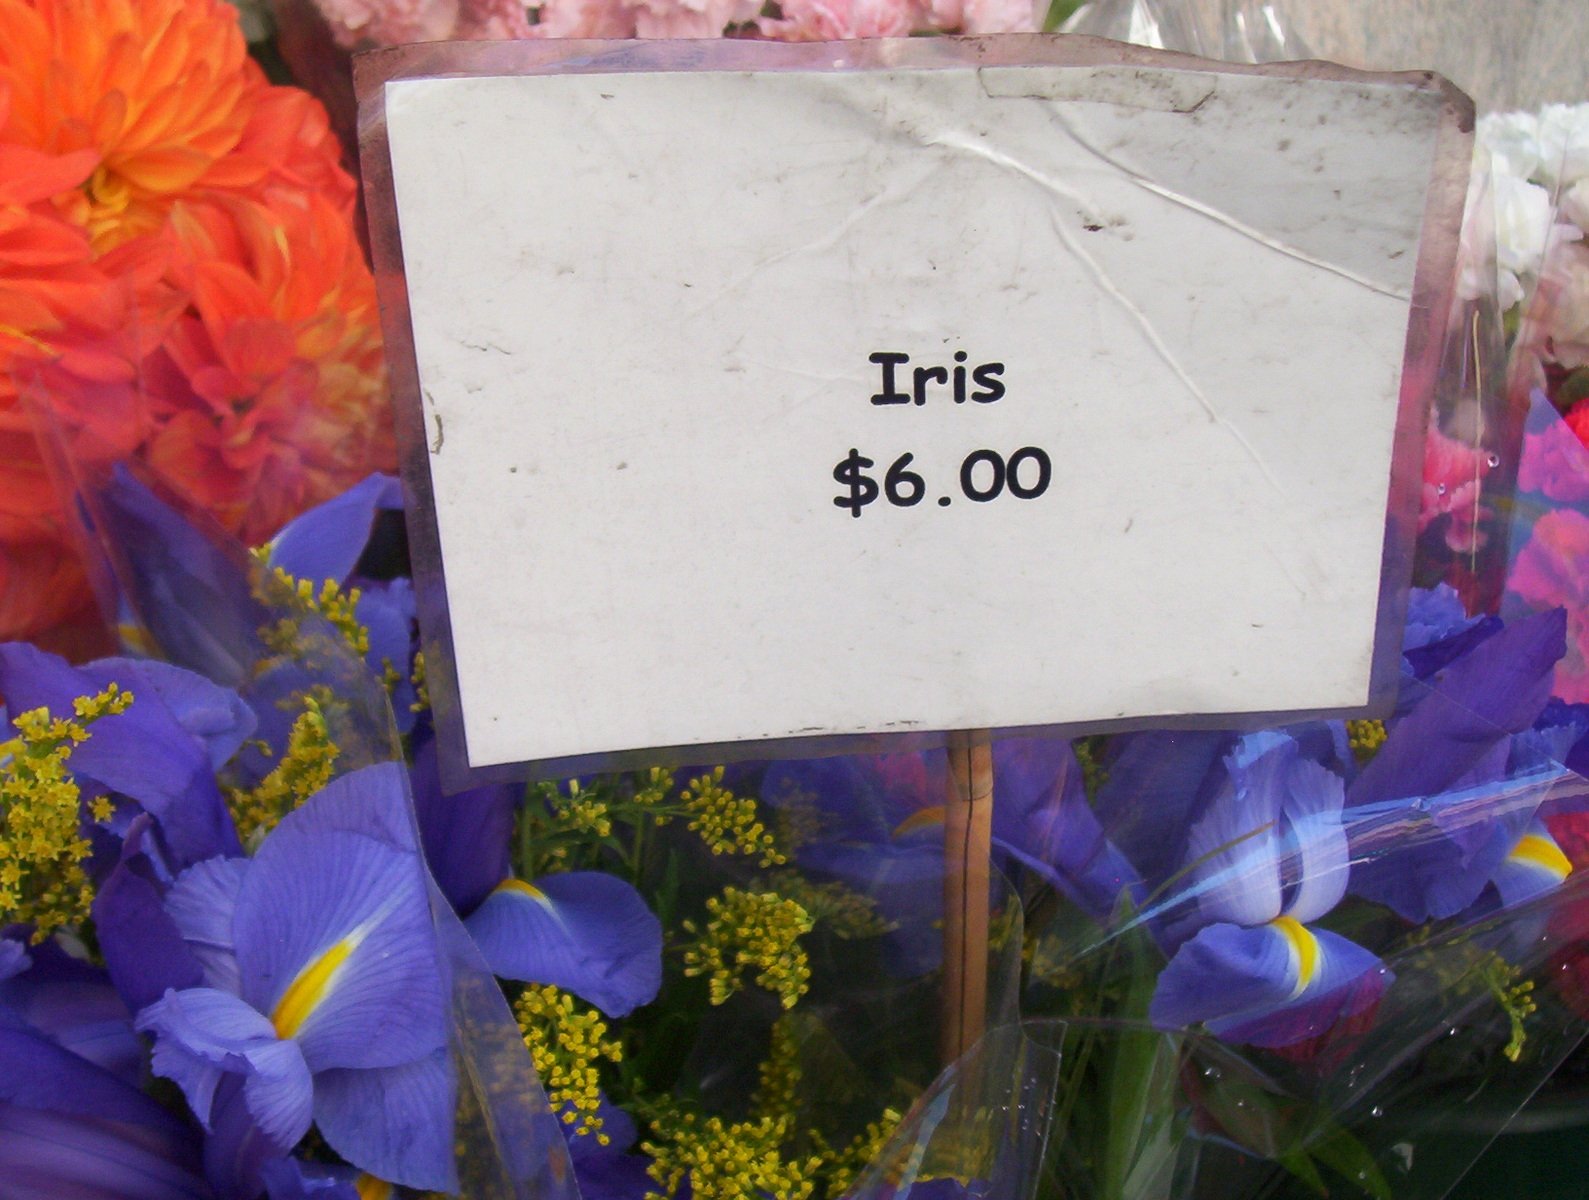 there is a sign on some flowers that say it is $ 6 00